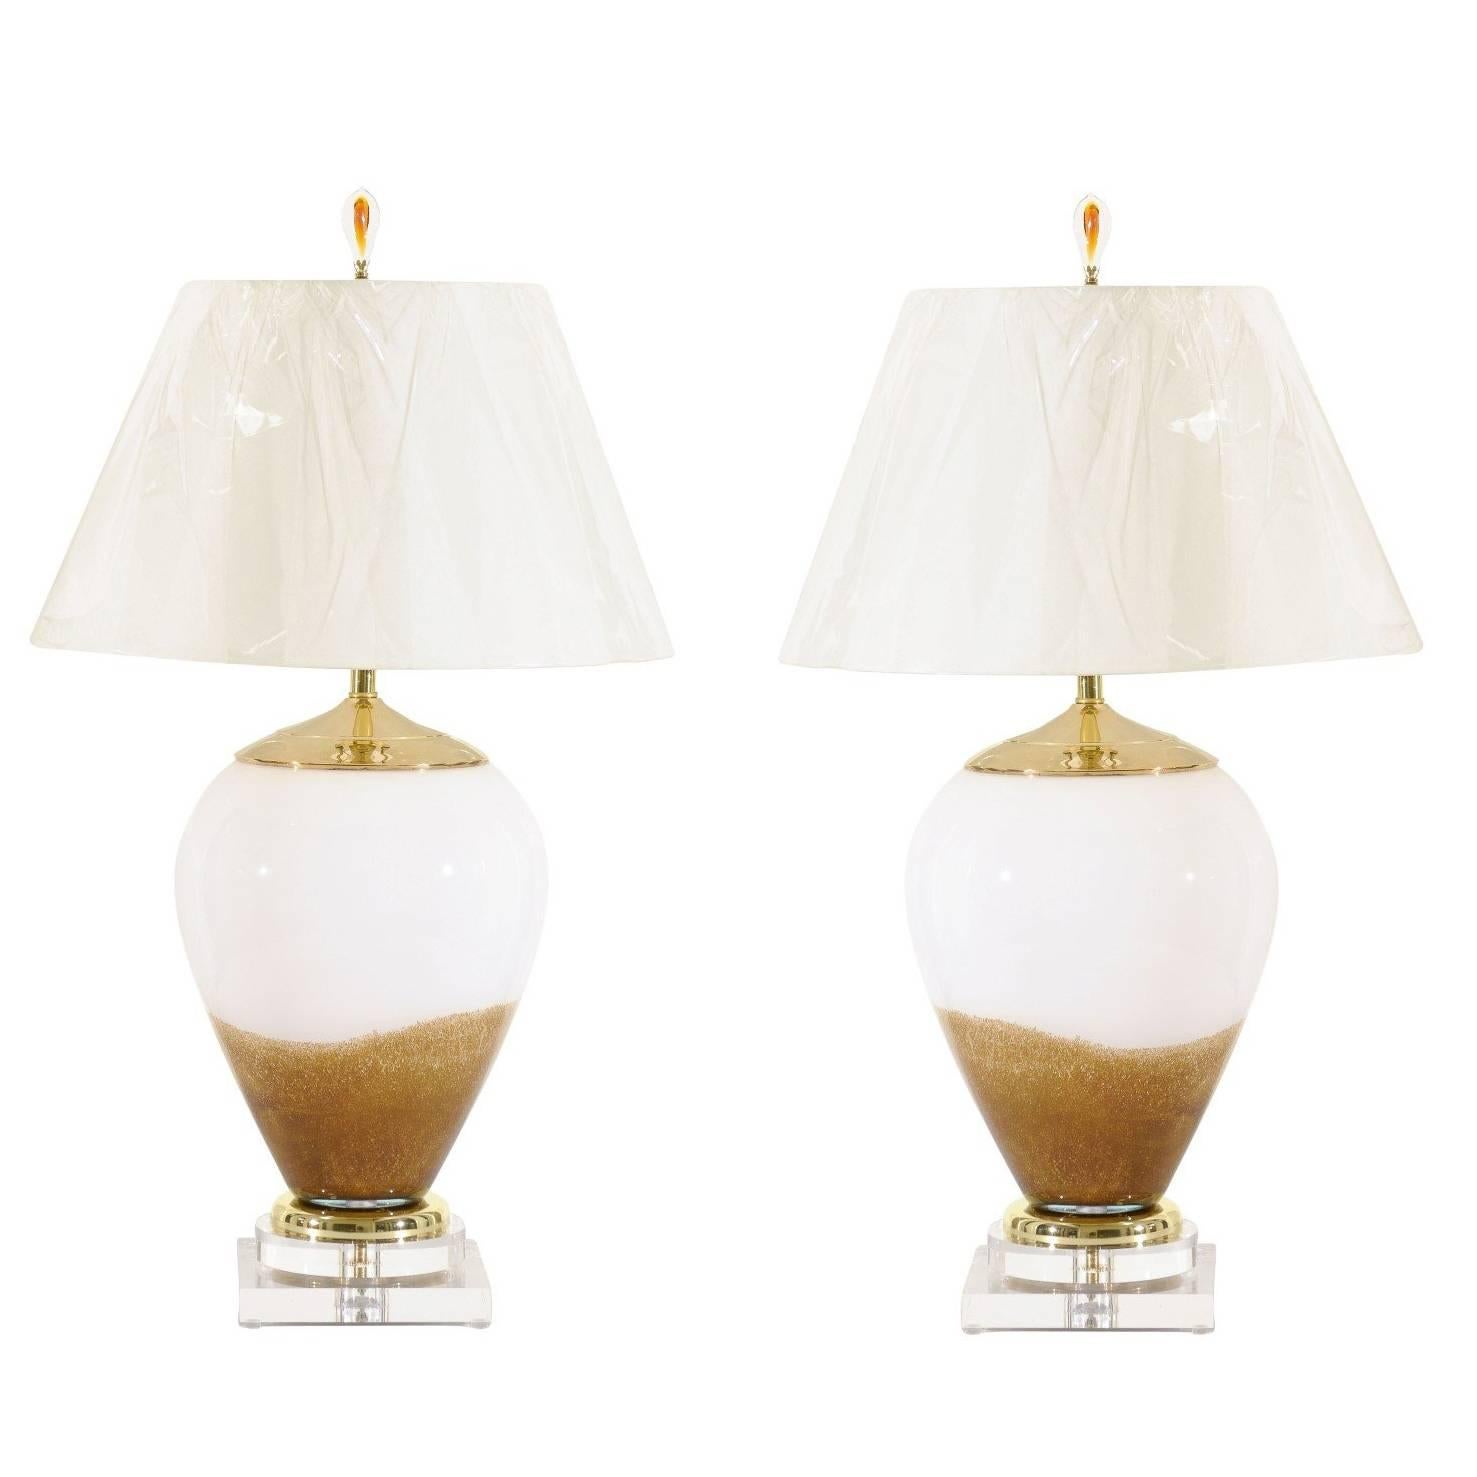 Exceptional Pair of Blown Glass Lamps in Caramel and Cream, Poland, circa 1990